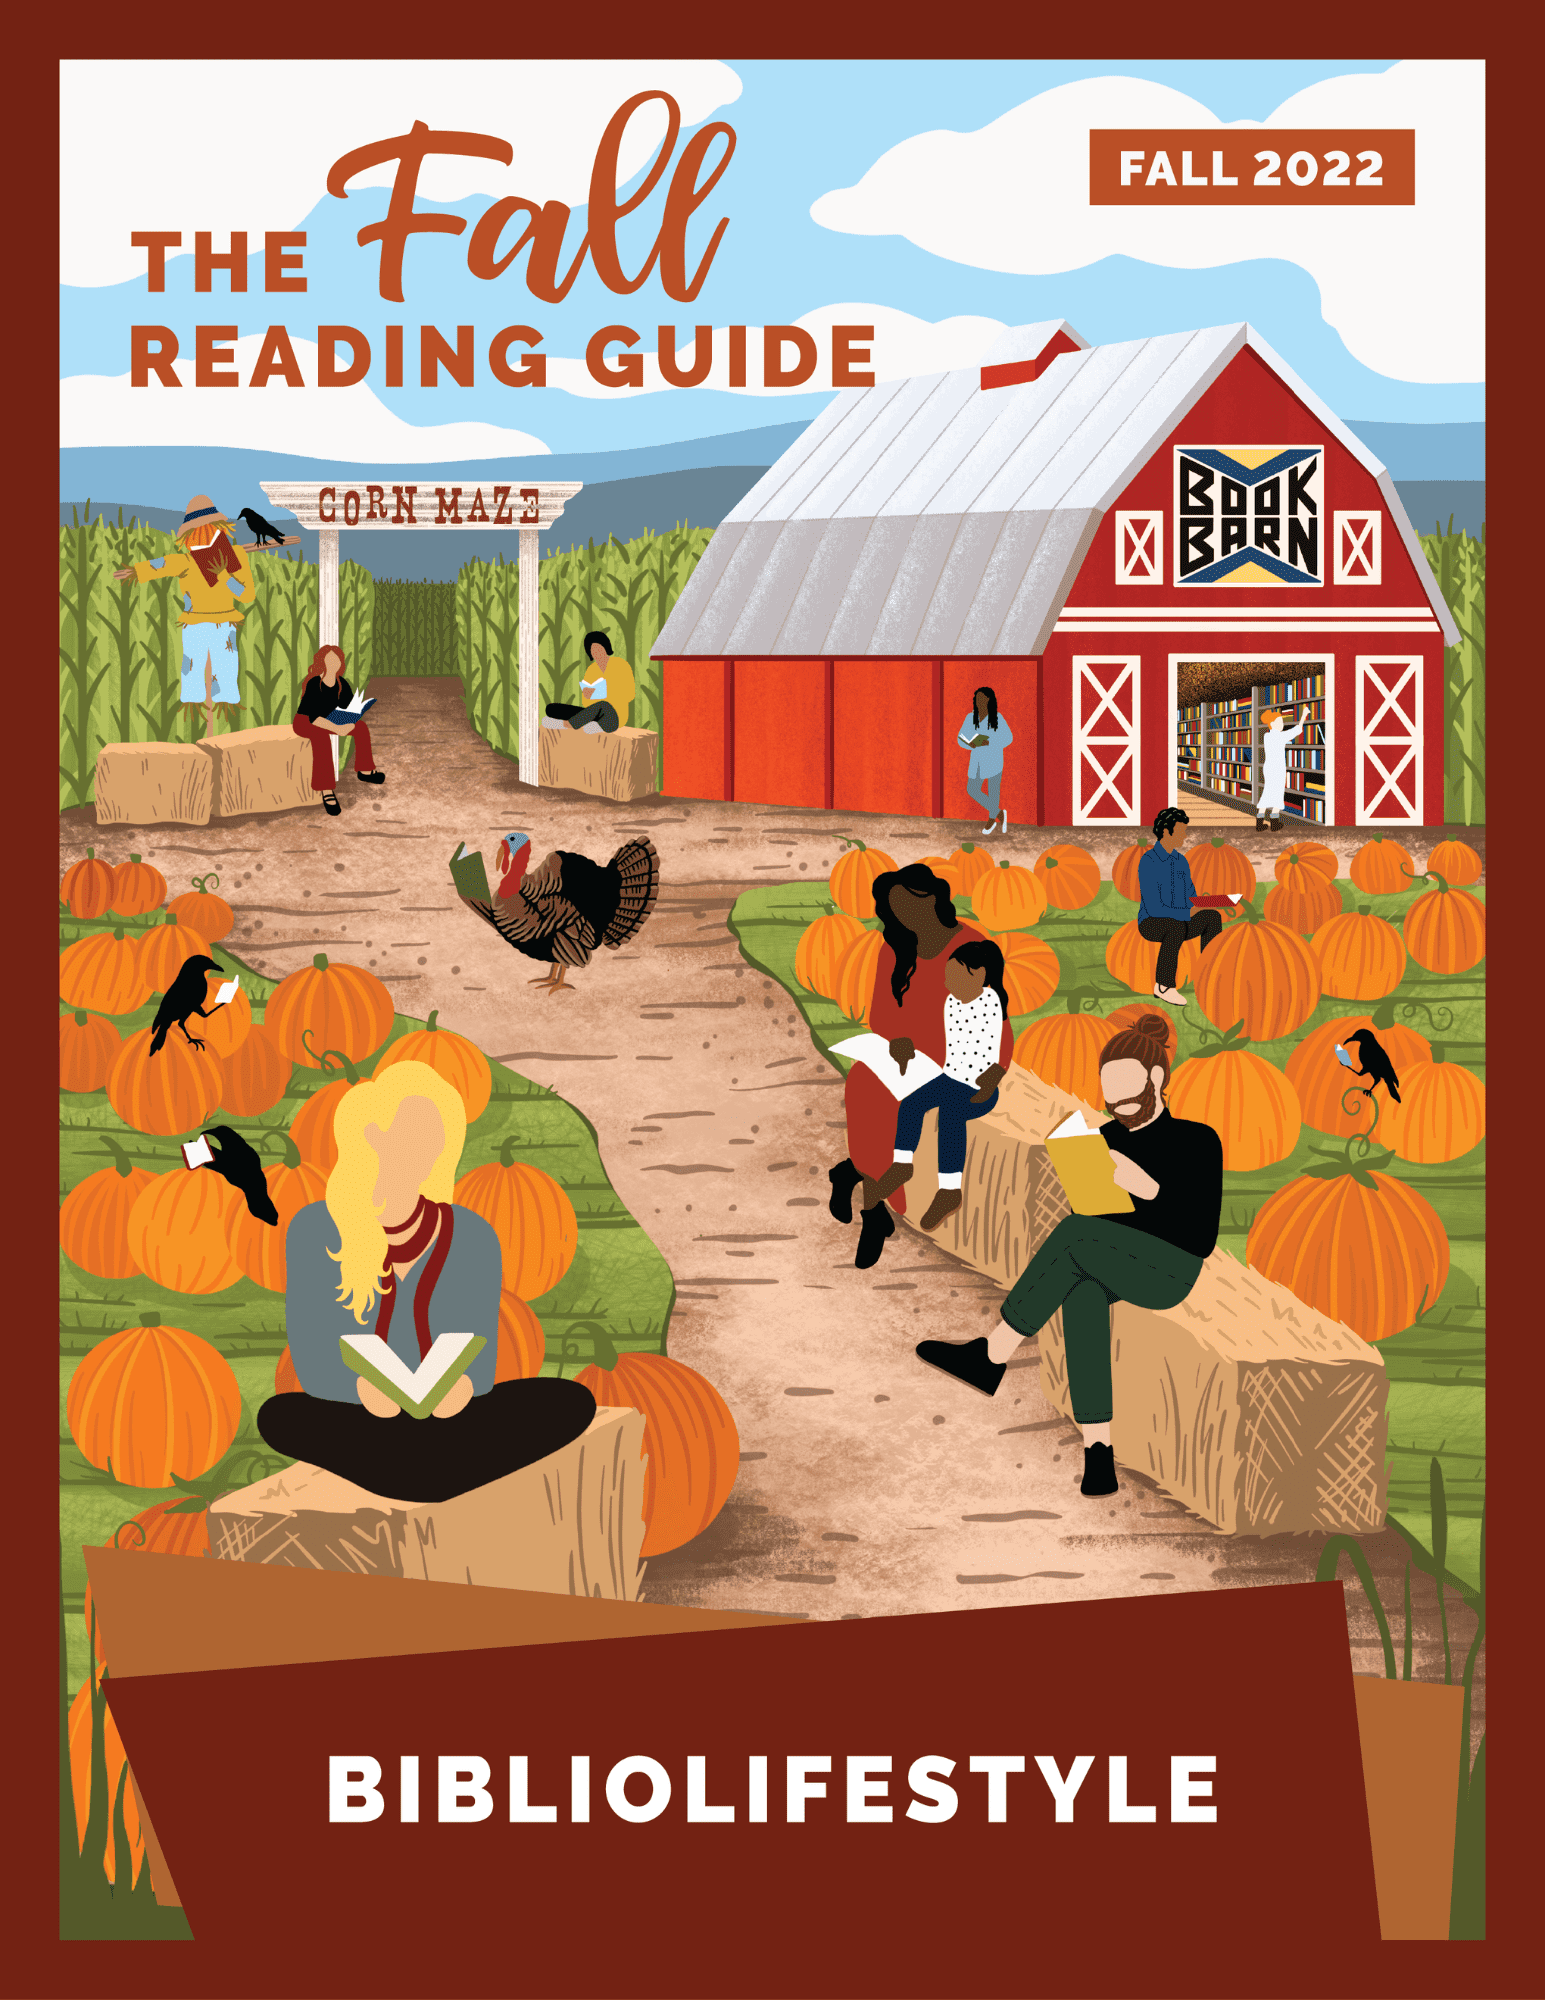 BiblioLifestyle - The 2022 Fall Reading Guide